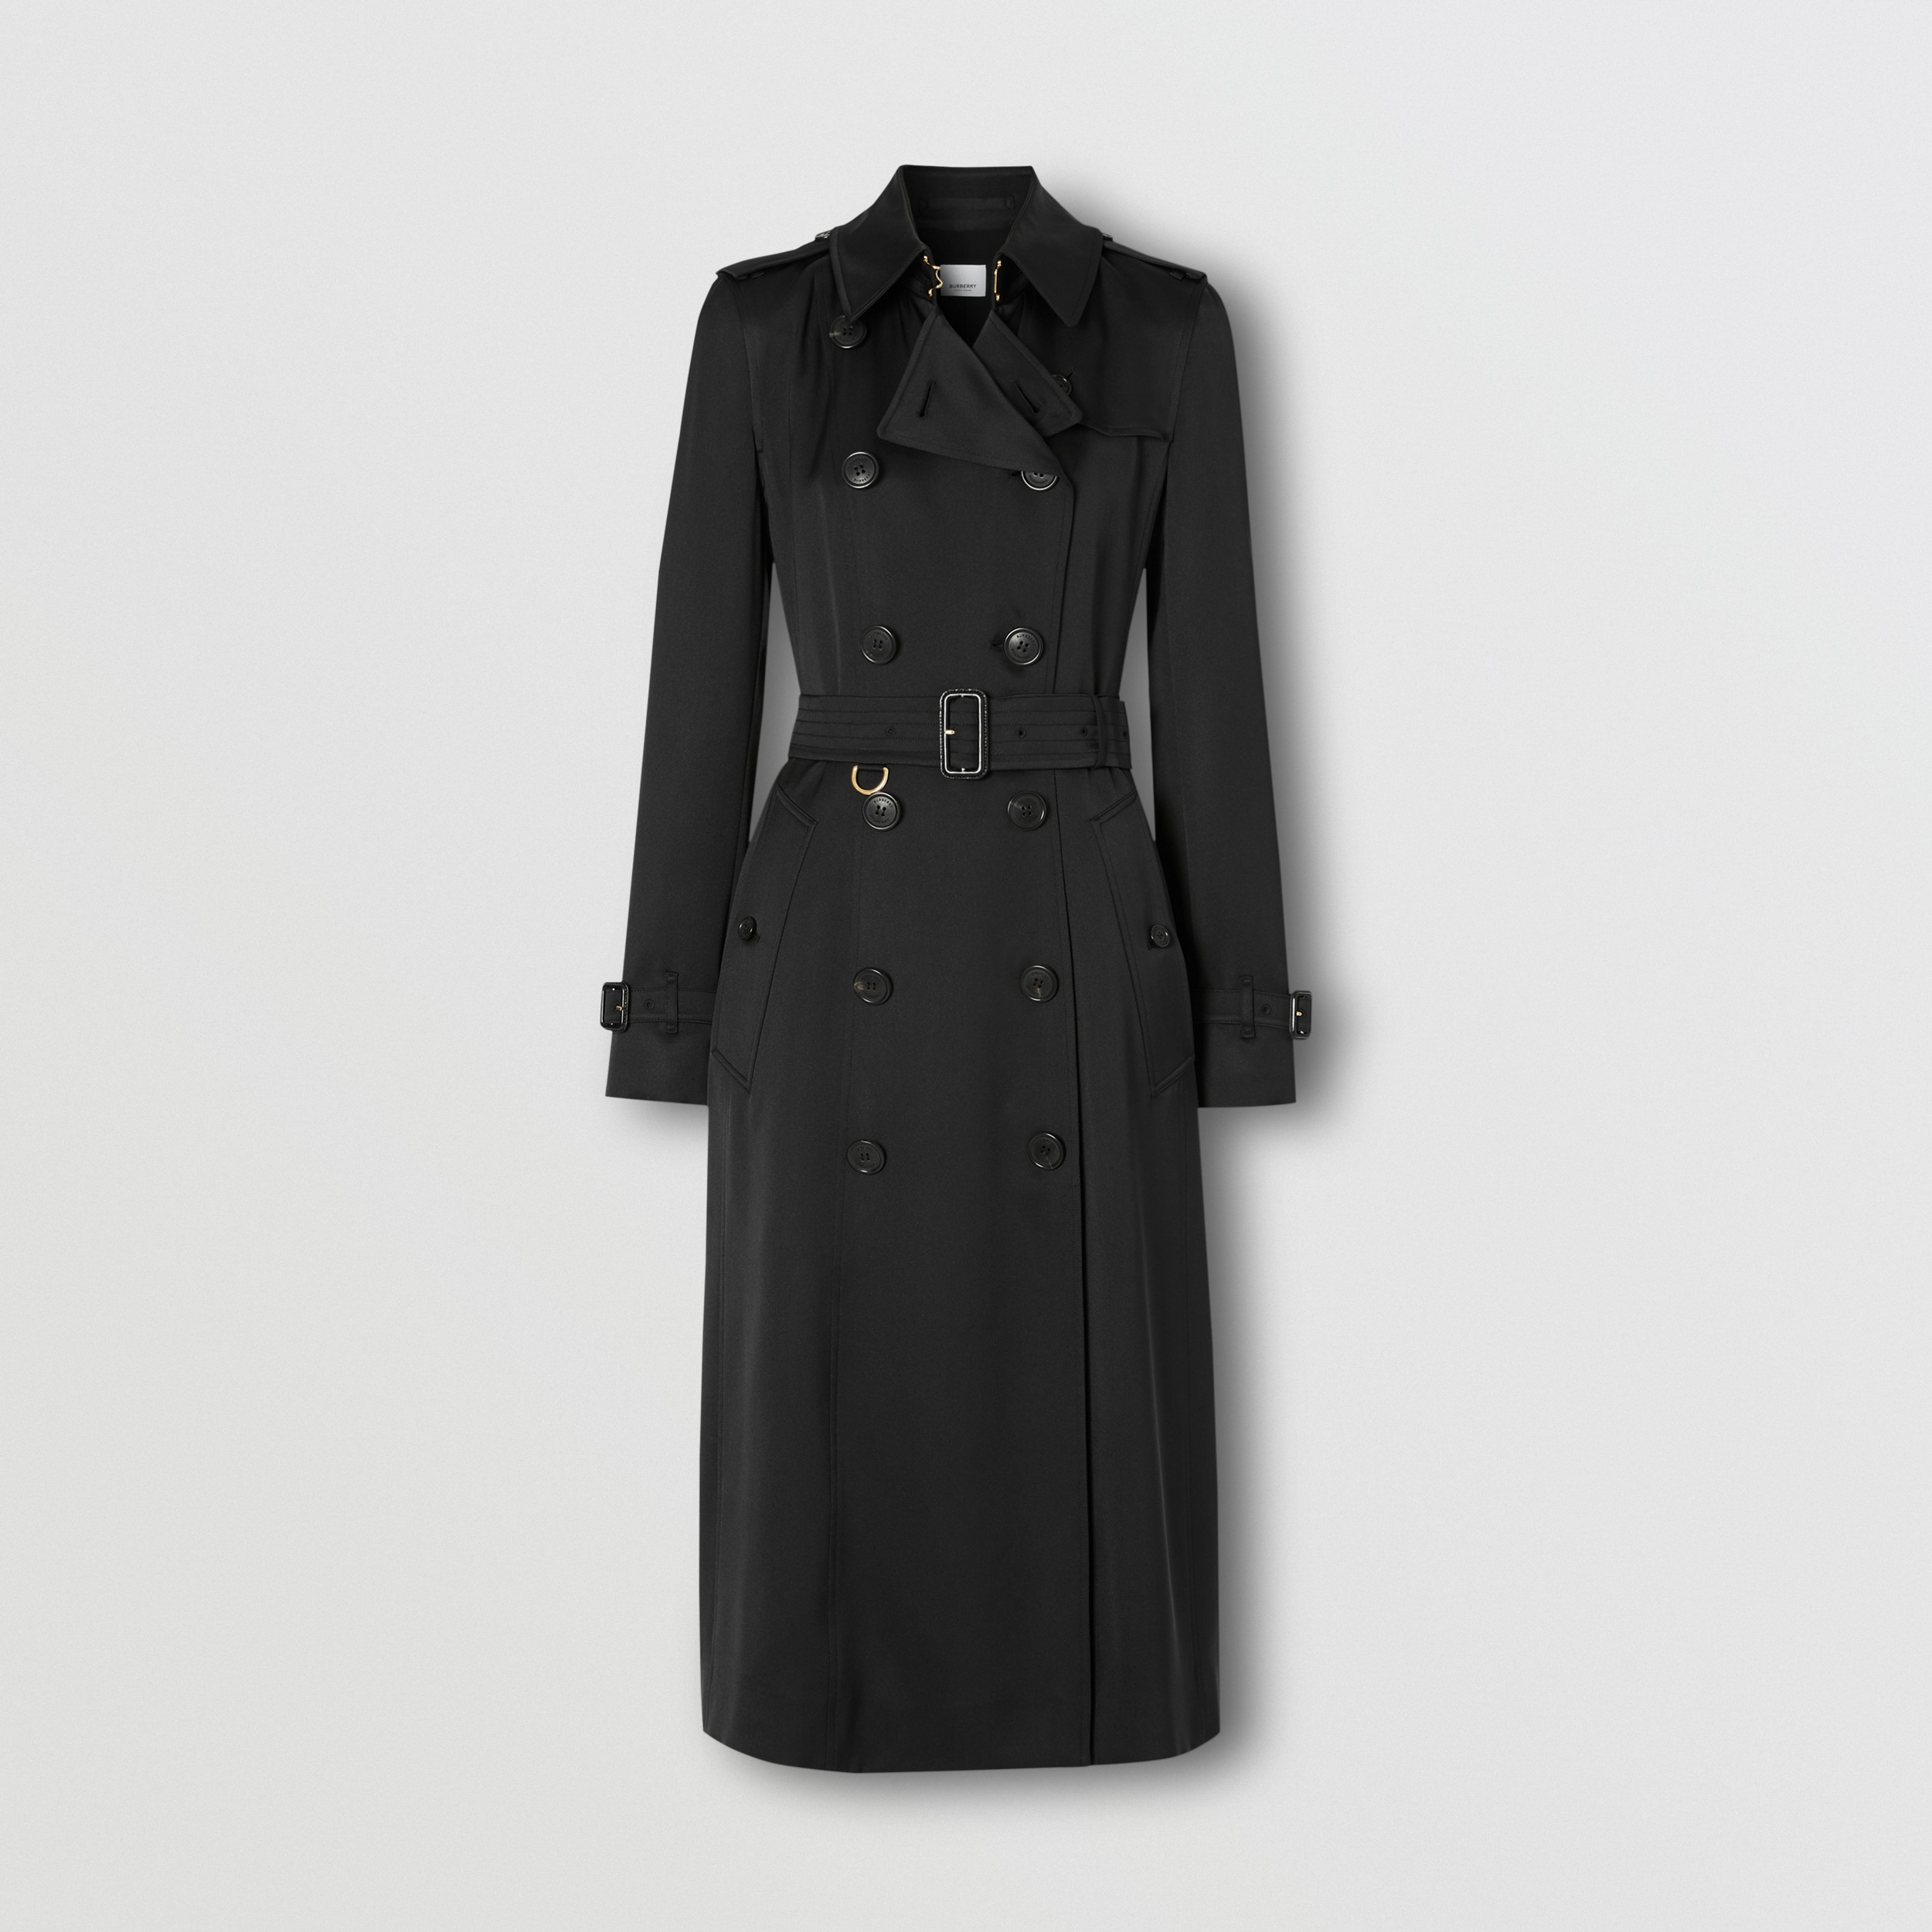 Silk Satin Trench Coat in Black - Women | Burberry United States